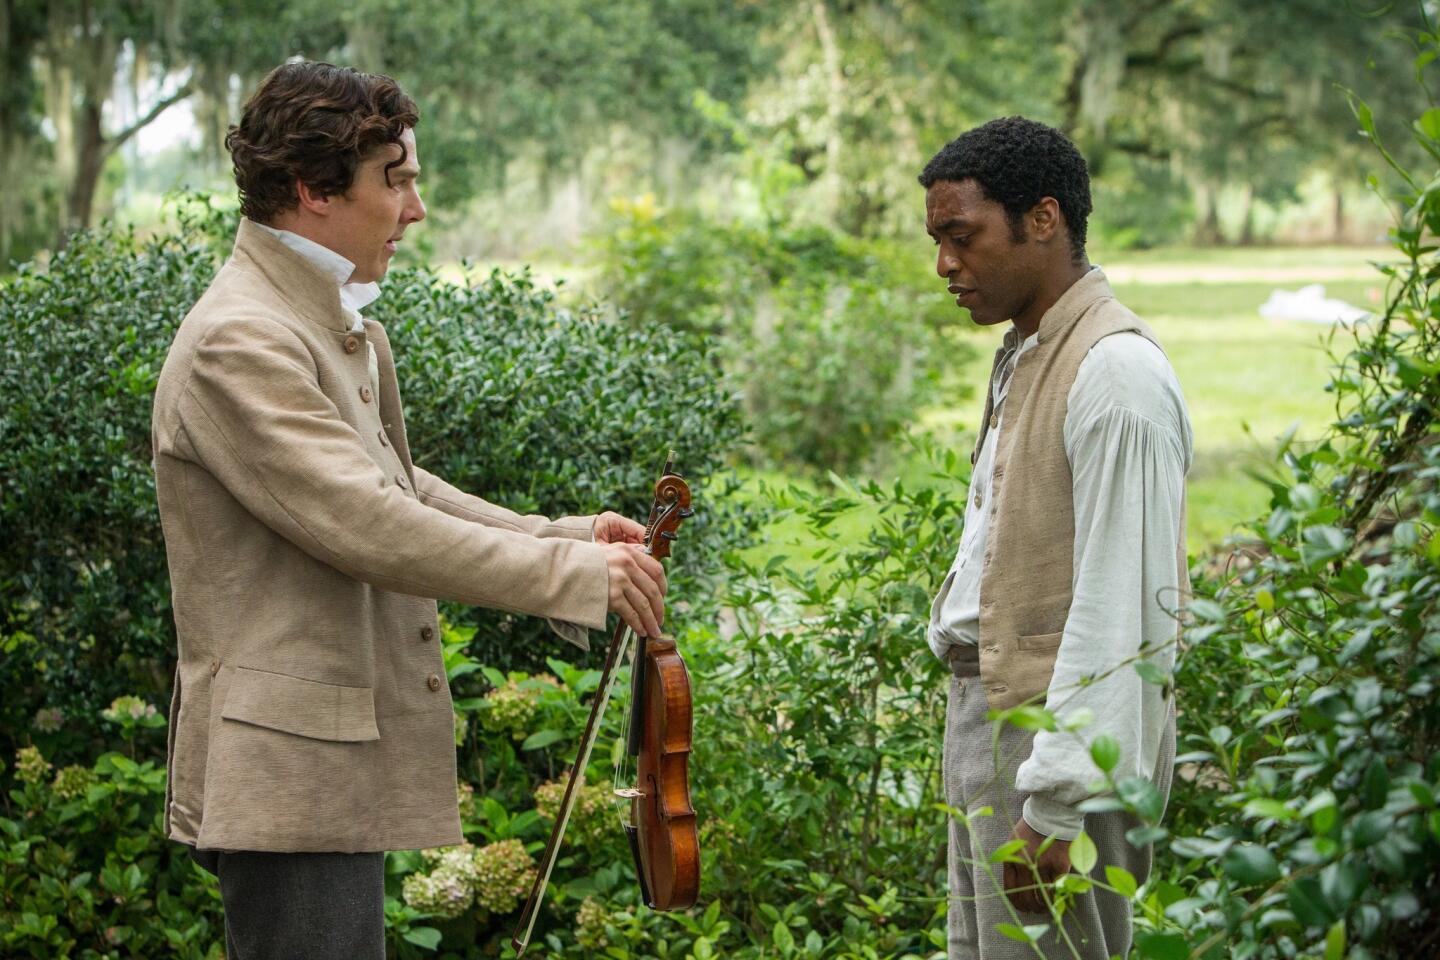 '12 Years a Slave'